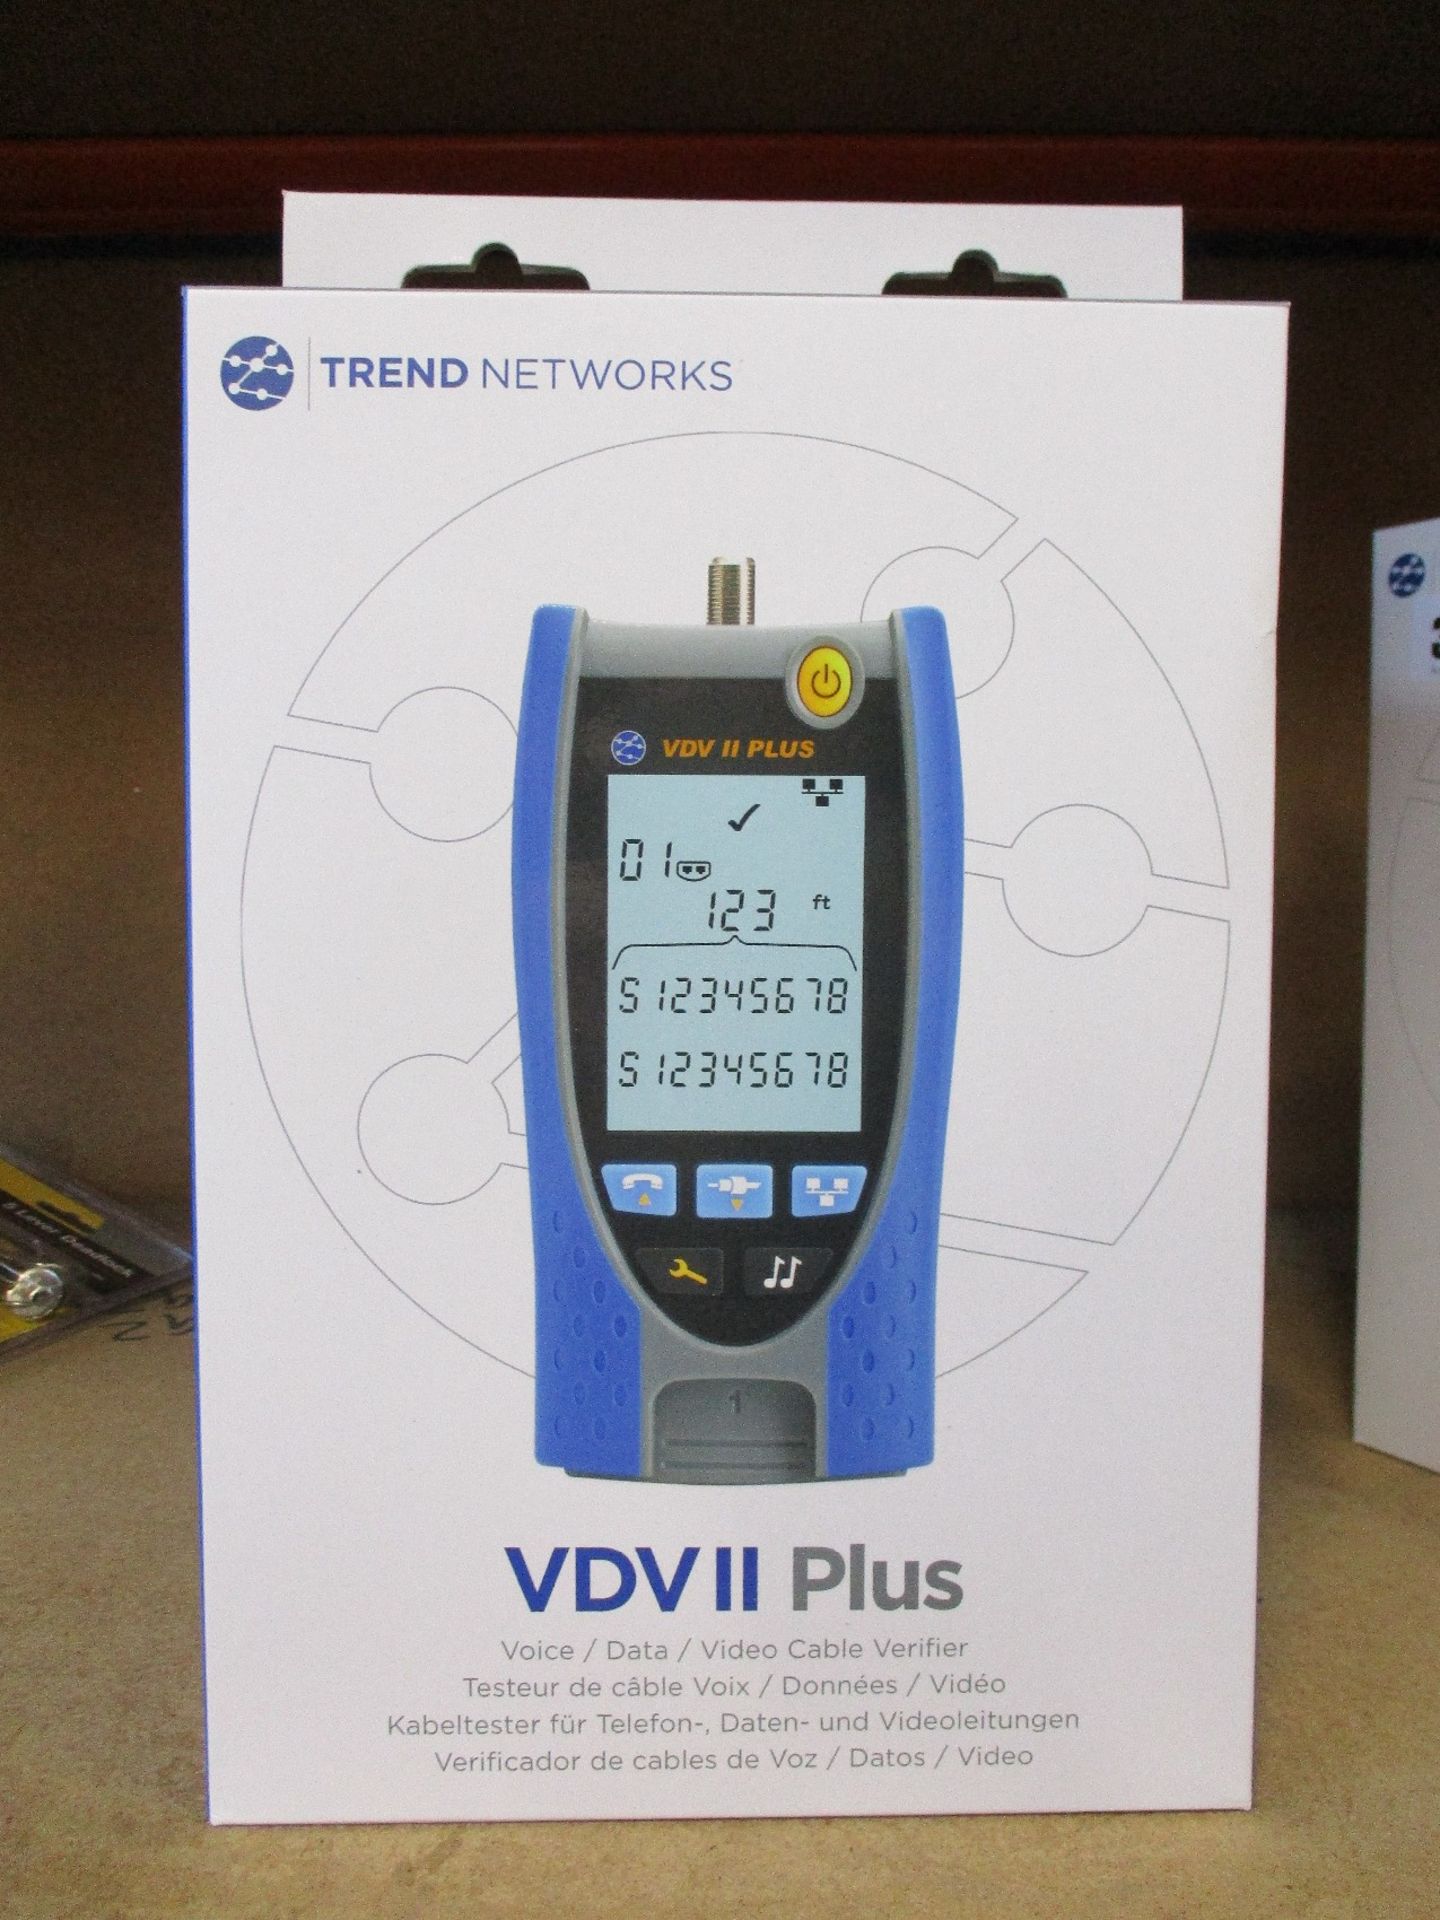 A boxed as new Trend Networks VDVII Plus voice/data/cable verifier (EAN: 783250764853).